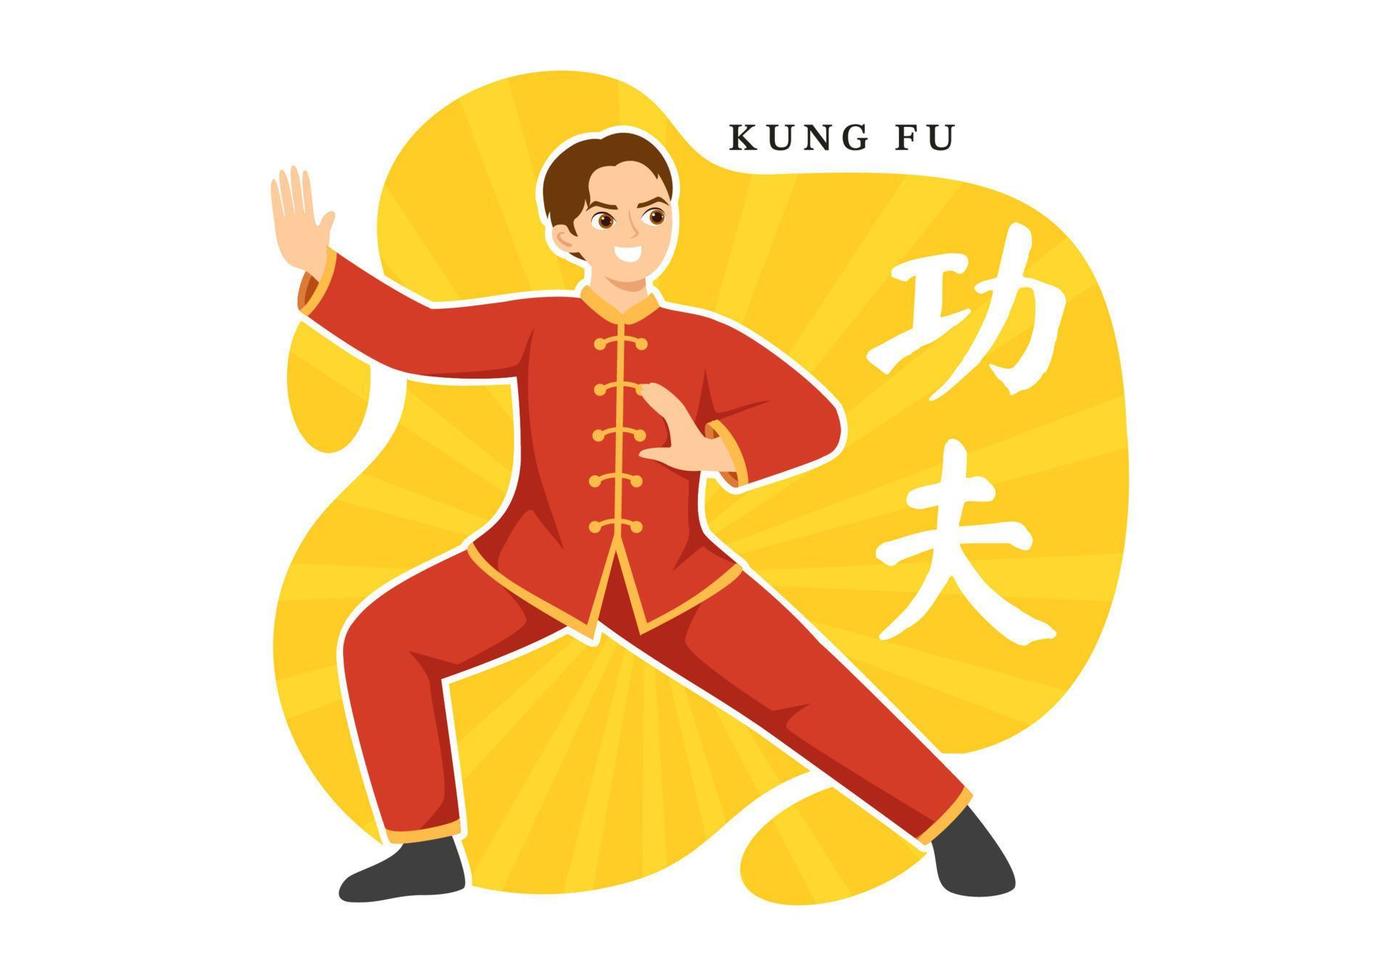 Kung Fu Illustration with People Showing Chinese Sport Martial Art in Flat Cartoon Hand Drawn for Web Banner or Landing Page Templates vector